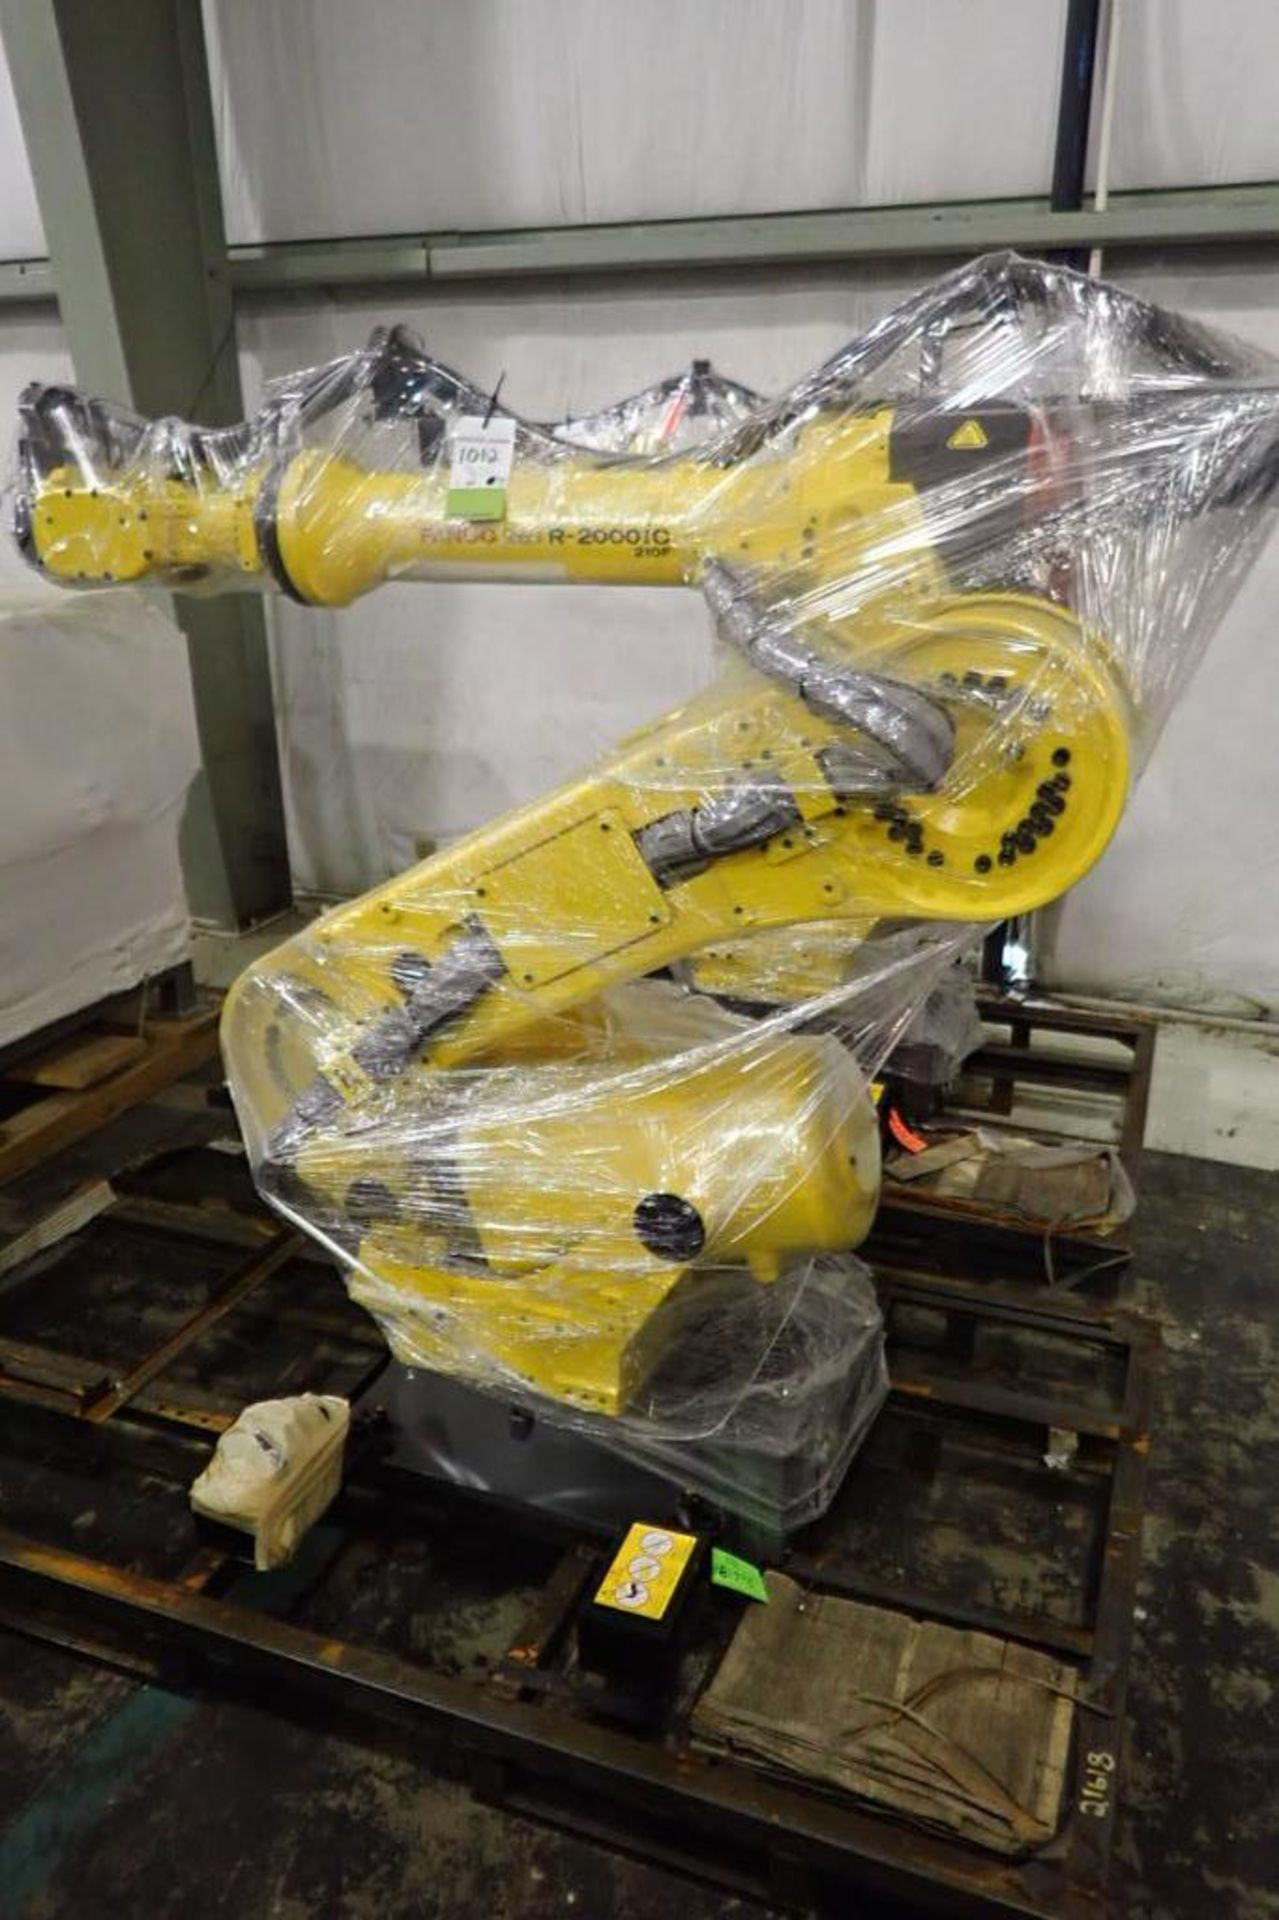 NEW Fanuc robot depalletizing system, Robot R-2000iC210F robot arm with pedestal, control panel, inf - Image 6 of 38